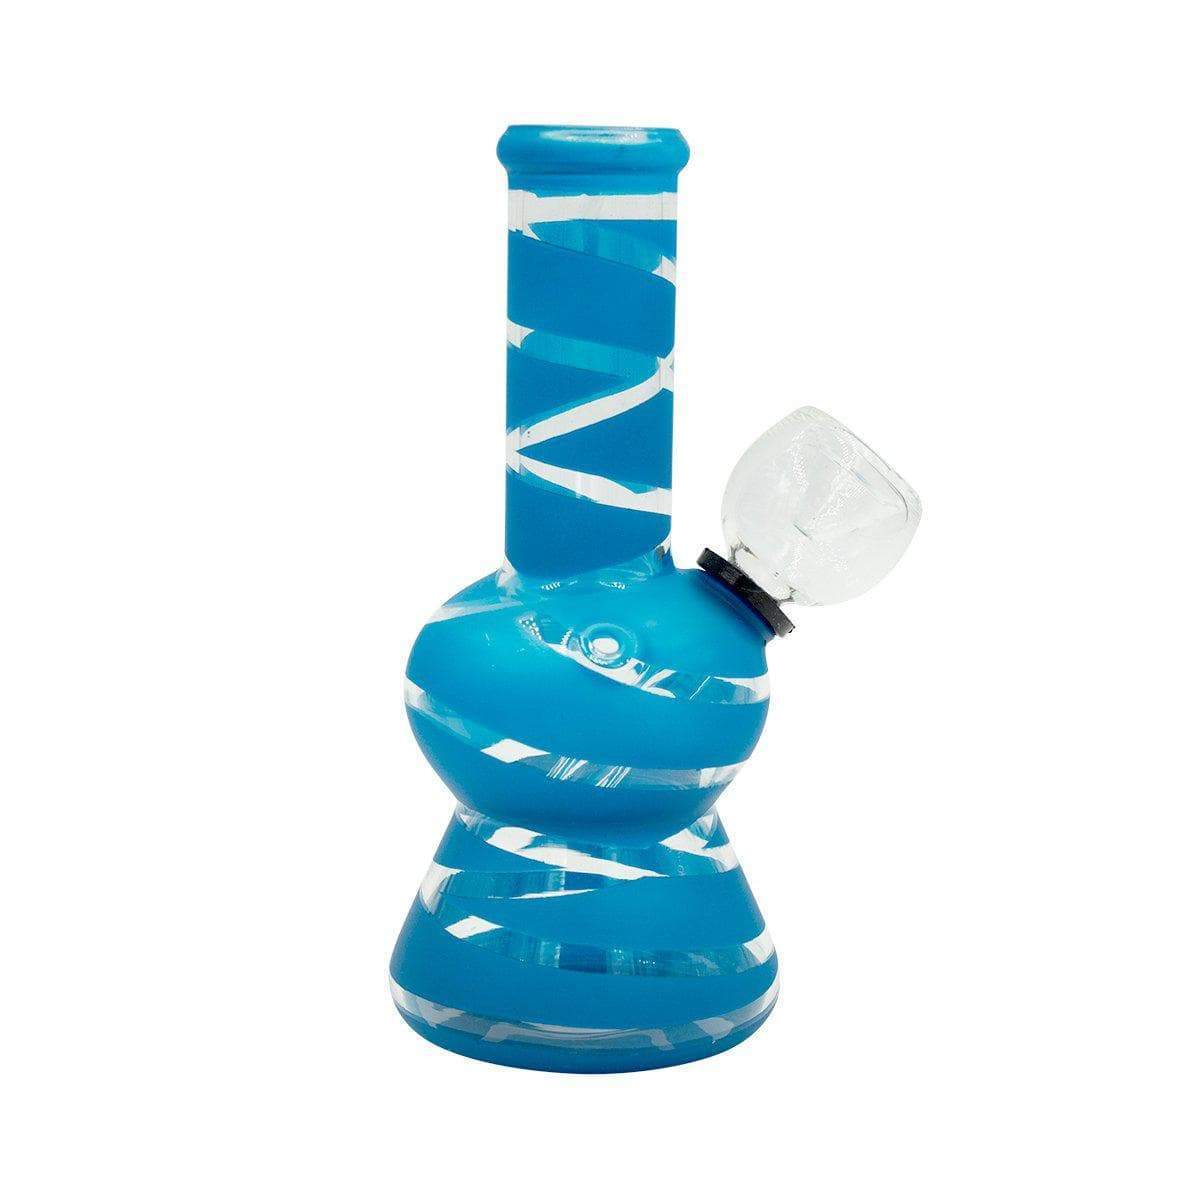 5-inch mini carb bong smoking device clear mouthpiece sleek striped design hot blue color